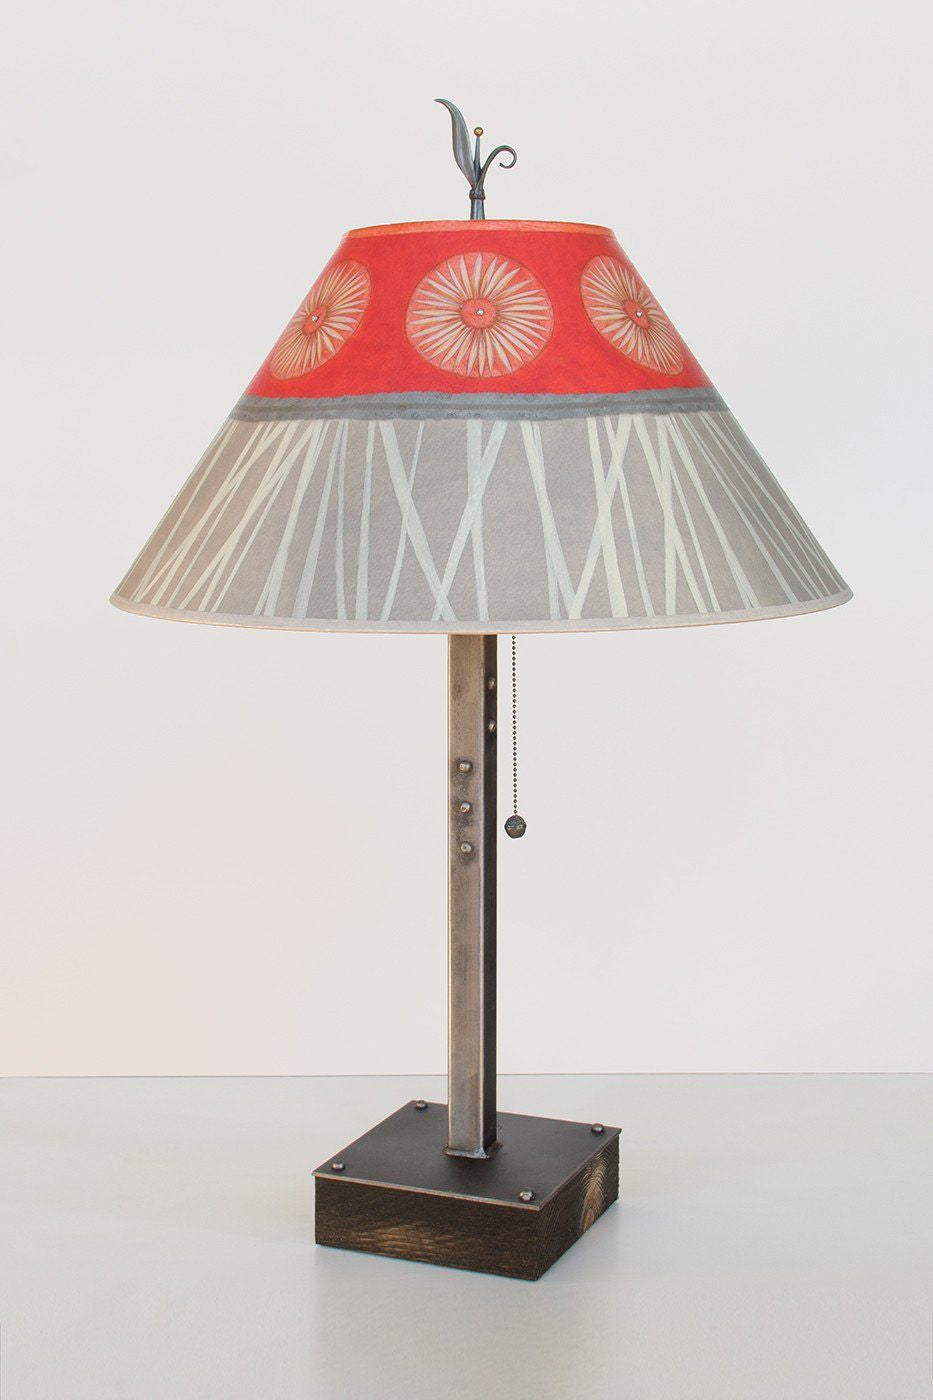 Janna Ugone &amp; Co Table Lamps Steel Table Lamp on Wood with Large Conical Shade in Tang